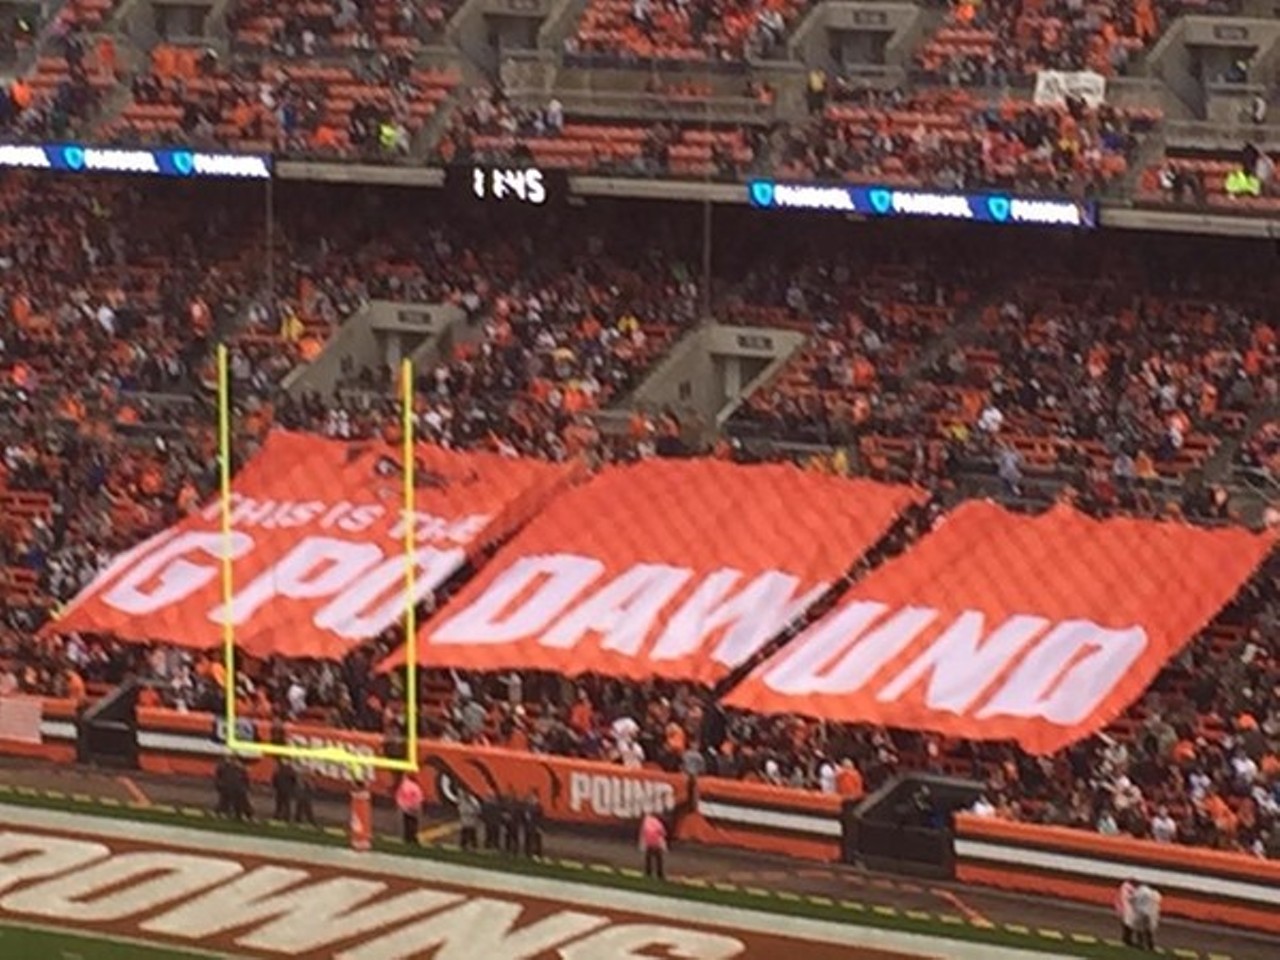 Caring About the Browns More Than the Indians or Cavaliers 
The Cavaliers have gone to four straight Finals, winning it all in 2016. The Indians have gone to the postseason in back-to-back years for the first time since 1998 and 1999 and are built around superstars in their prime like Francisco Lindor, Corey Kluber, Carlos Carrasco and Jose Ramirez. And yet, the putrid Browns, with just one win in the last two years and just two winning seasons since 1999, still get top billing in town in most people&#146;s minds. They&#146;ve done absolutely nothing to deserve that. 
Photo via Scene Archives